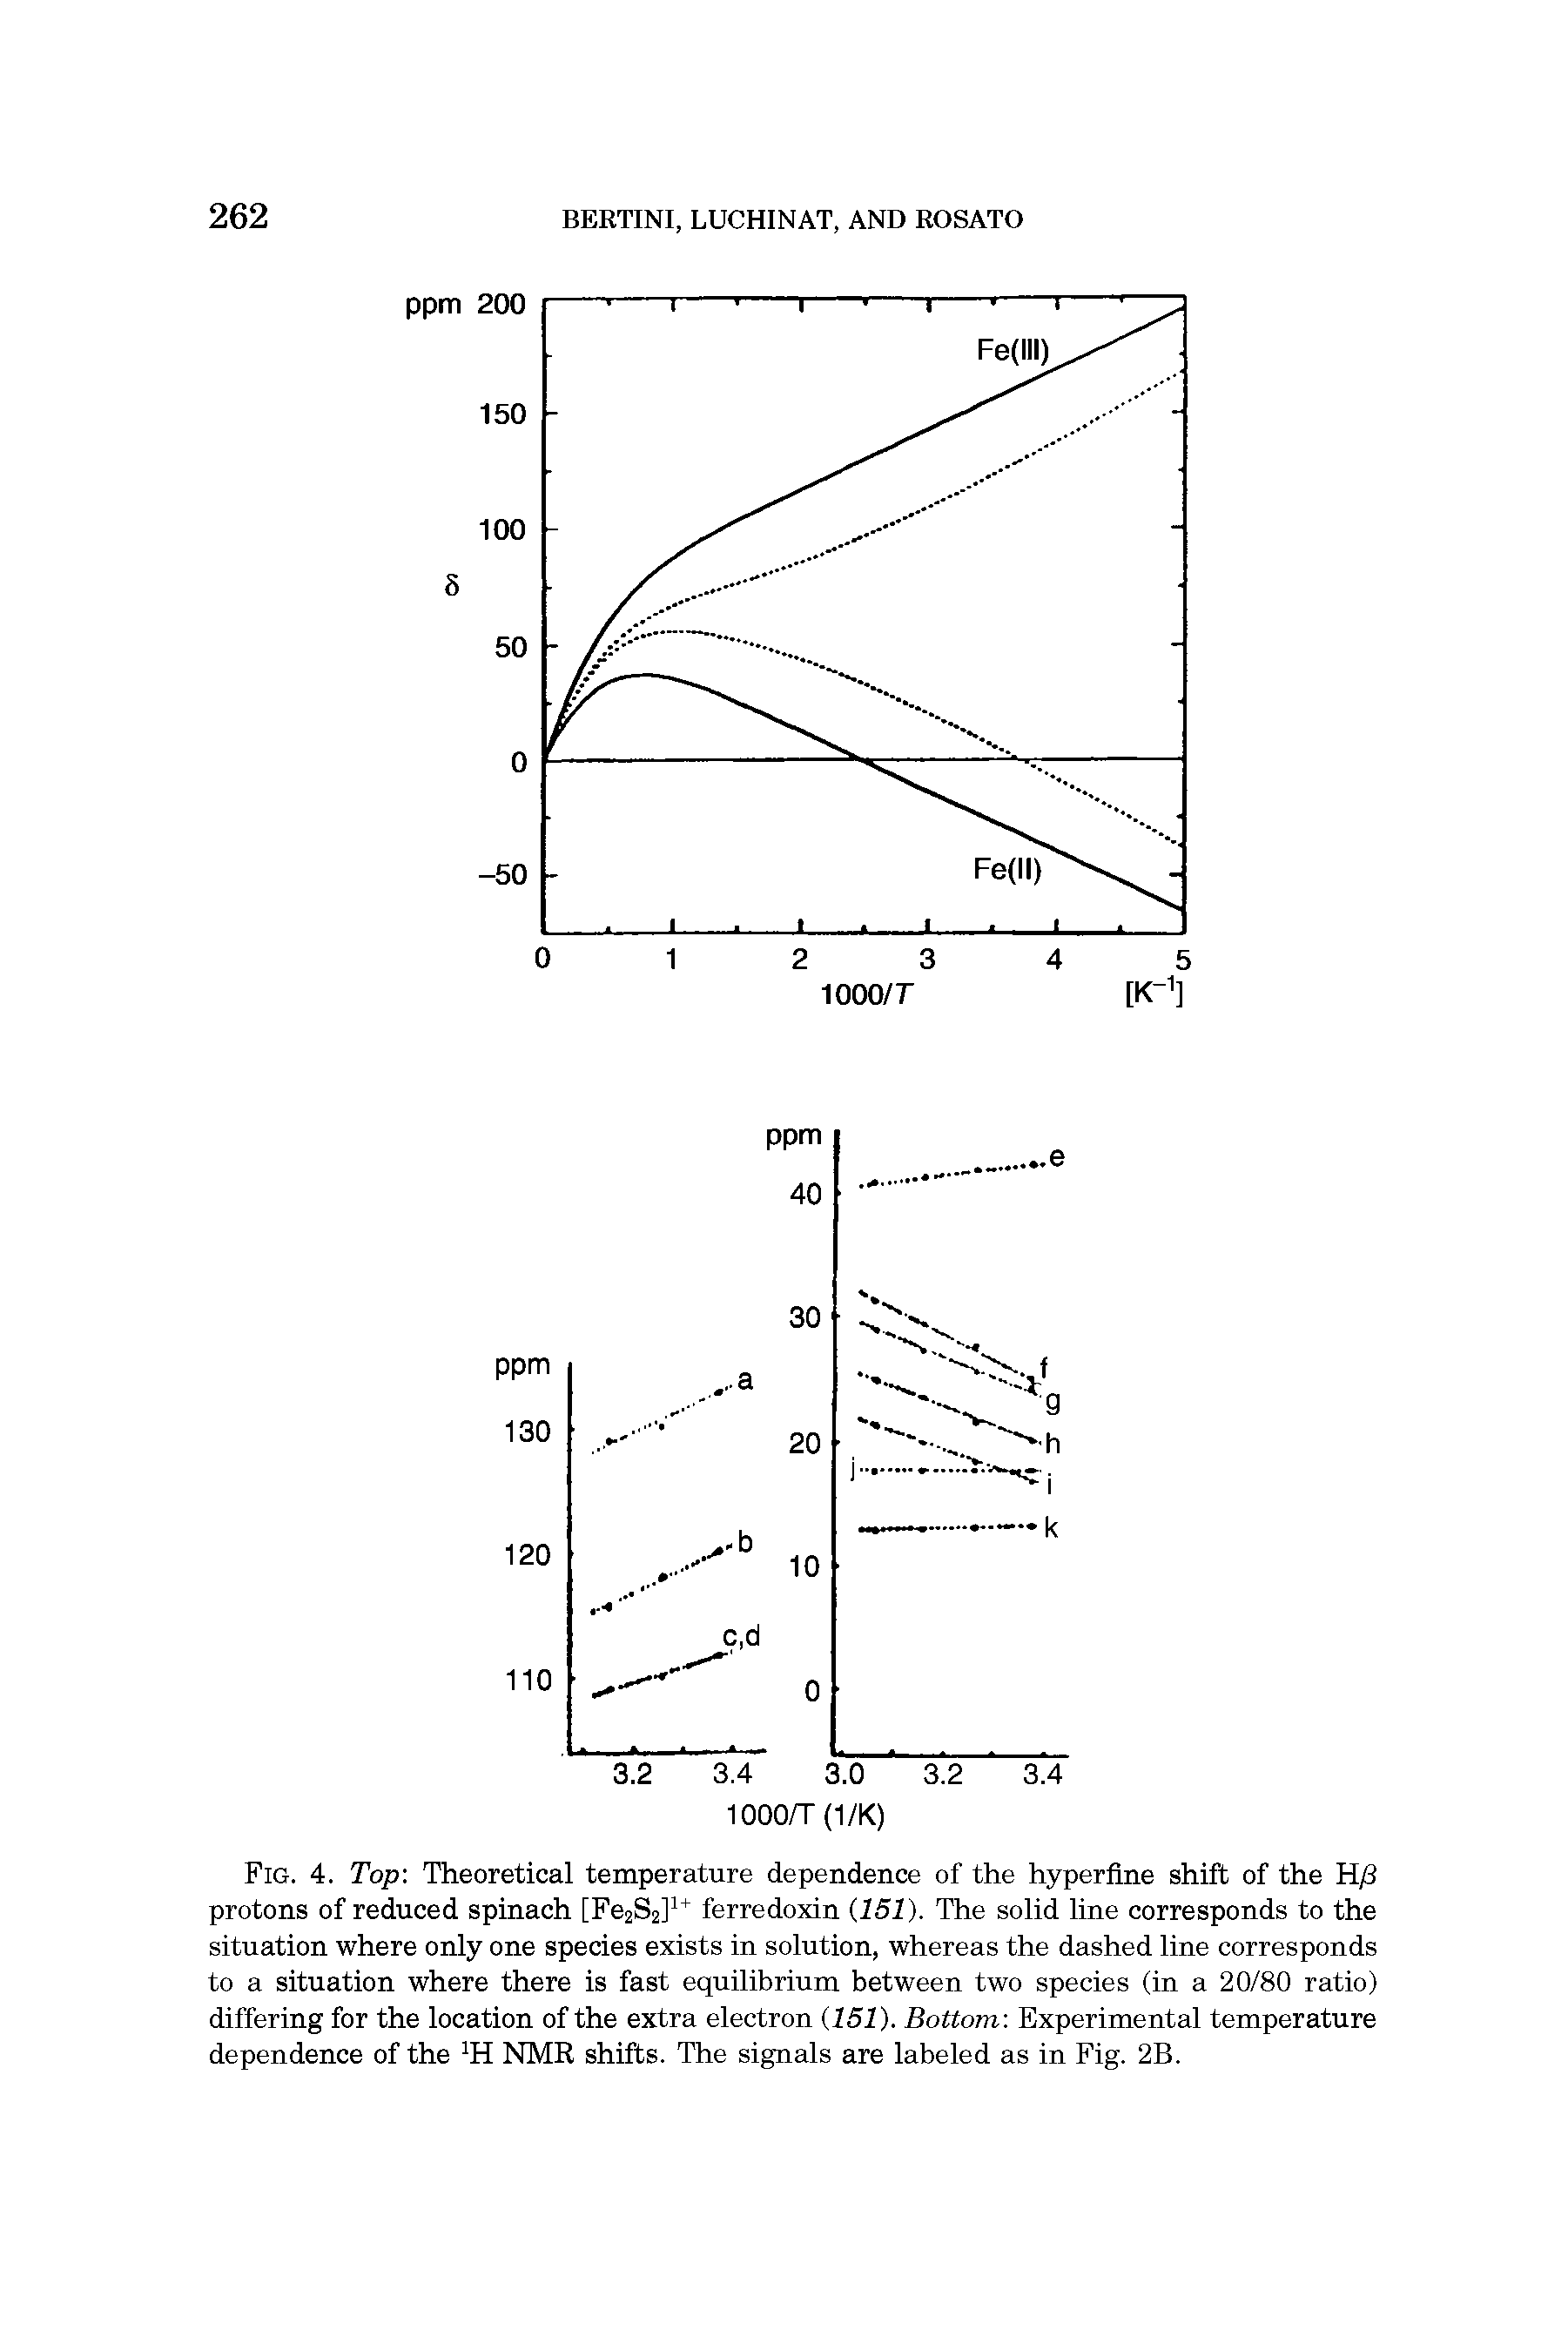 Fig. 4. Top Theoretical temperature dependence of the hyperfine shift of the H/3 protons of reduced spinach [Fe2S2] ferredoxin 151). The solid line corresponds to the situation where only one species exists in solution, whereas the dashed line corresponds to a situation where there is fast equilibrium between two species (in a 20/80 ratio) differing for the location of the extra electron 151). Bottom.-. Experimental temperature dependence of the H NMR shifts. The signals are labeled as in Fig. 2B.